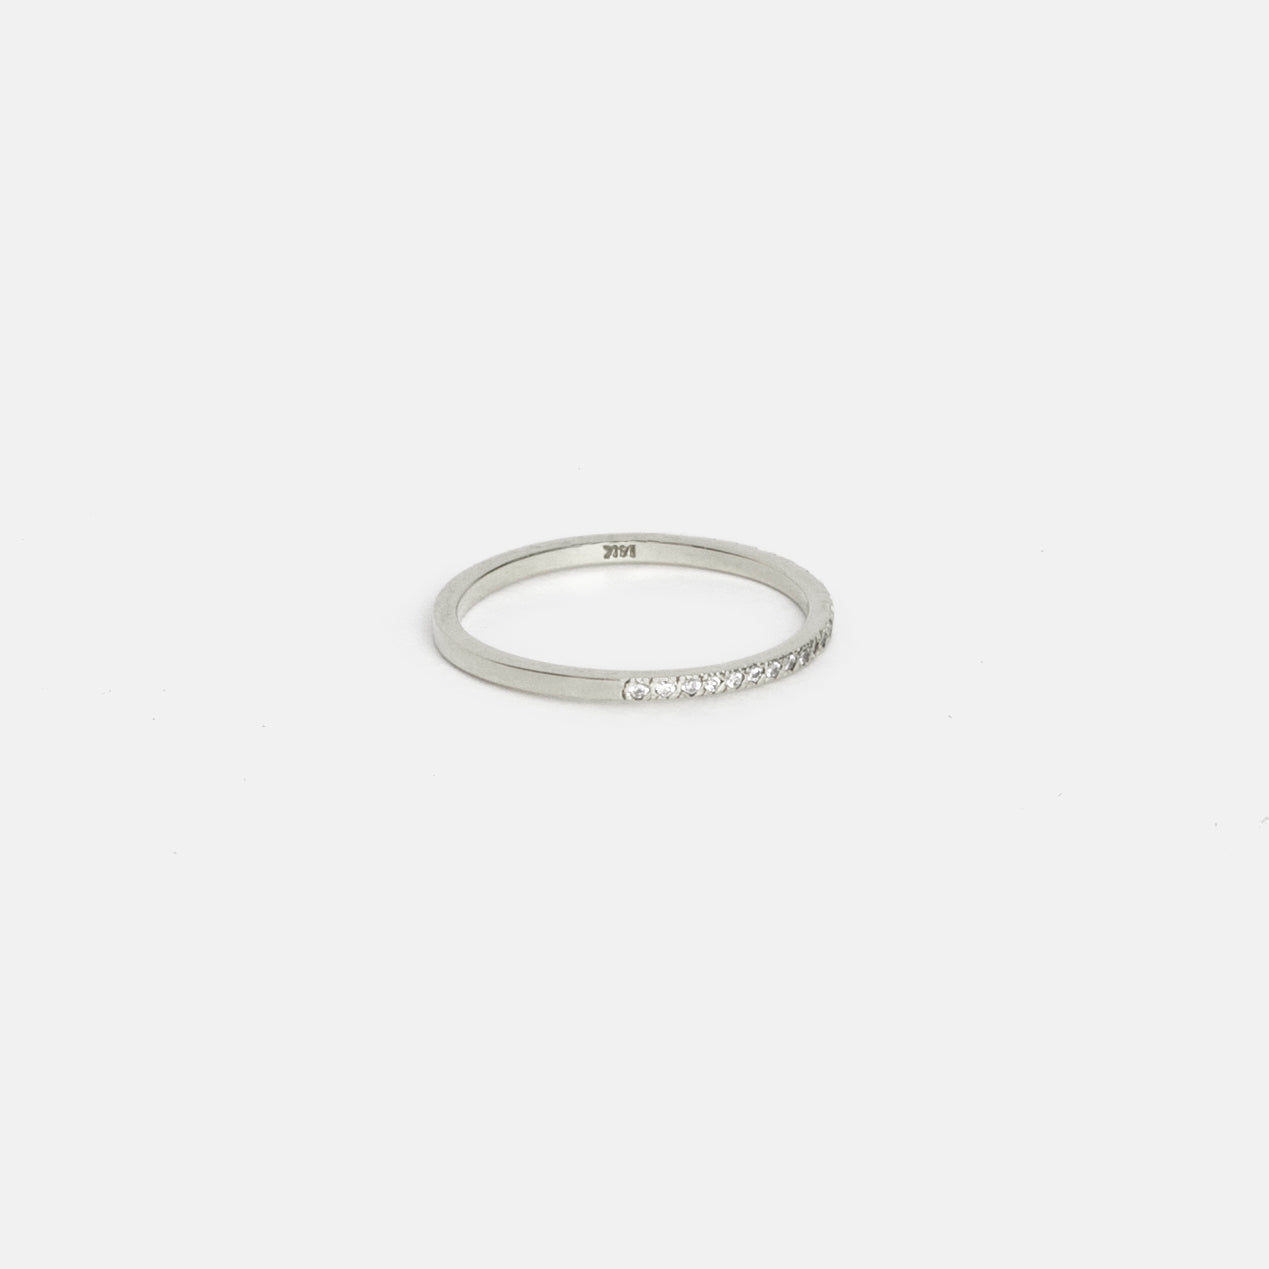 Eile Designer Ring in 14k White Gold set with White Diamonds By SHW Fine Jewelry New York CIty